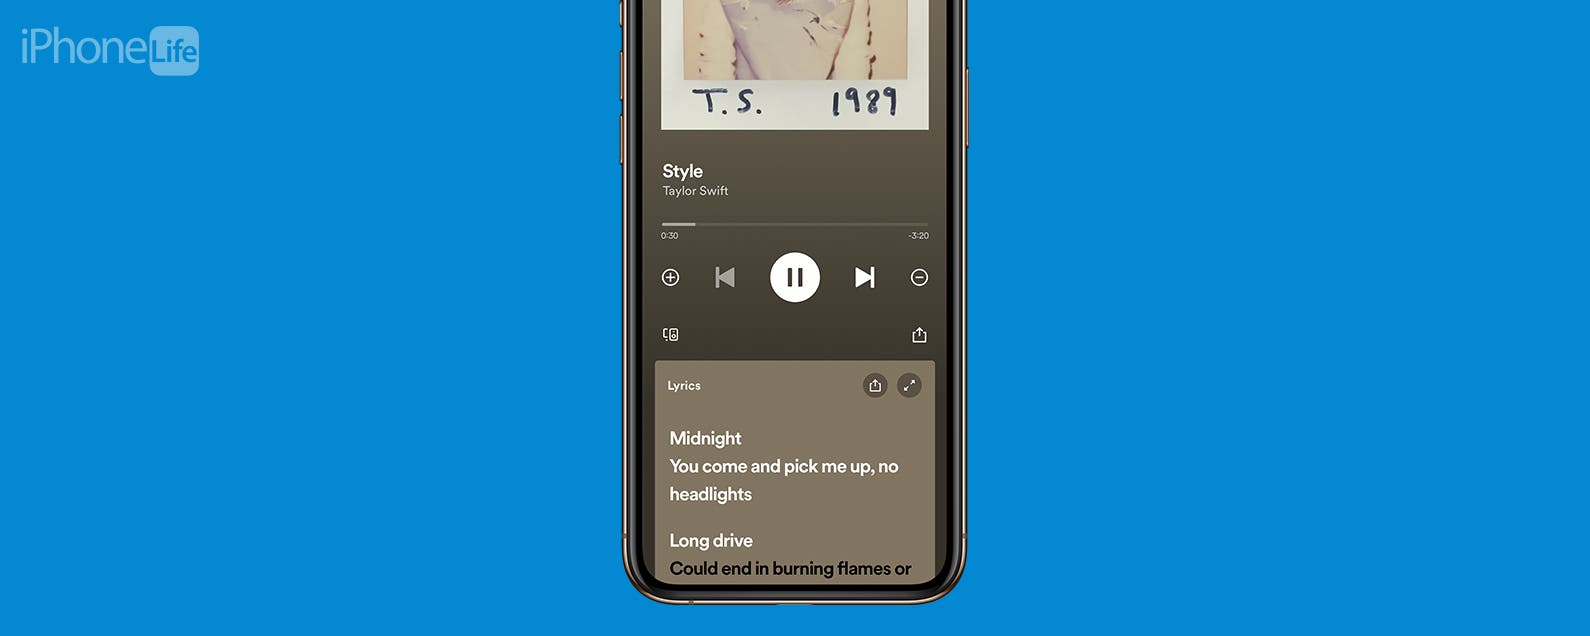 How to See Spotify Lyrics on iPhone